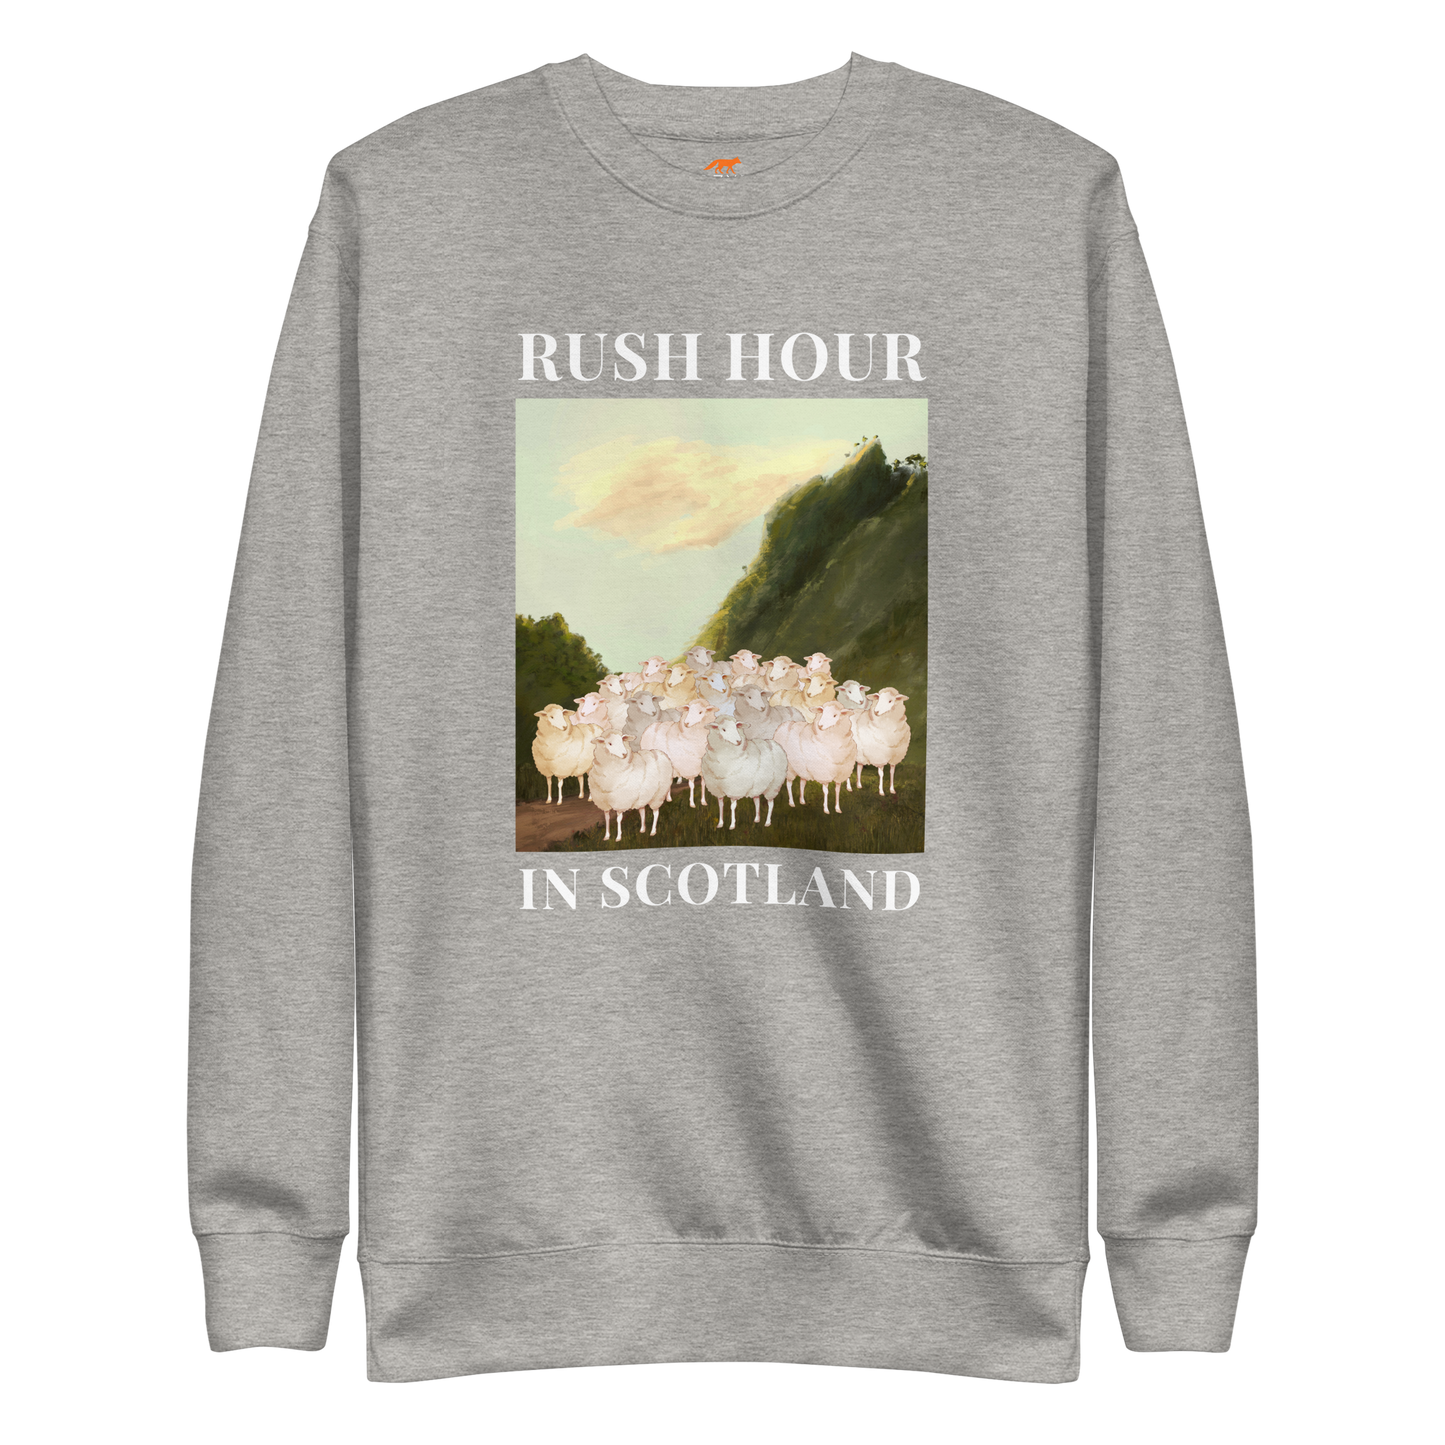 Carbon Grey Premium Sheep Sweatshirt featuring a comical Rush Hour In Scotland graphic on the chest - Artsy/Funny Graphic Sheep Sweatshirts - Boozy Fox